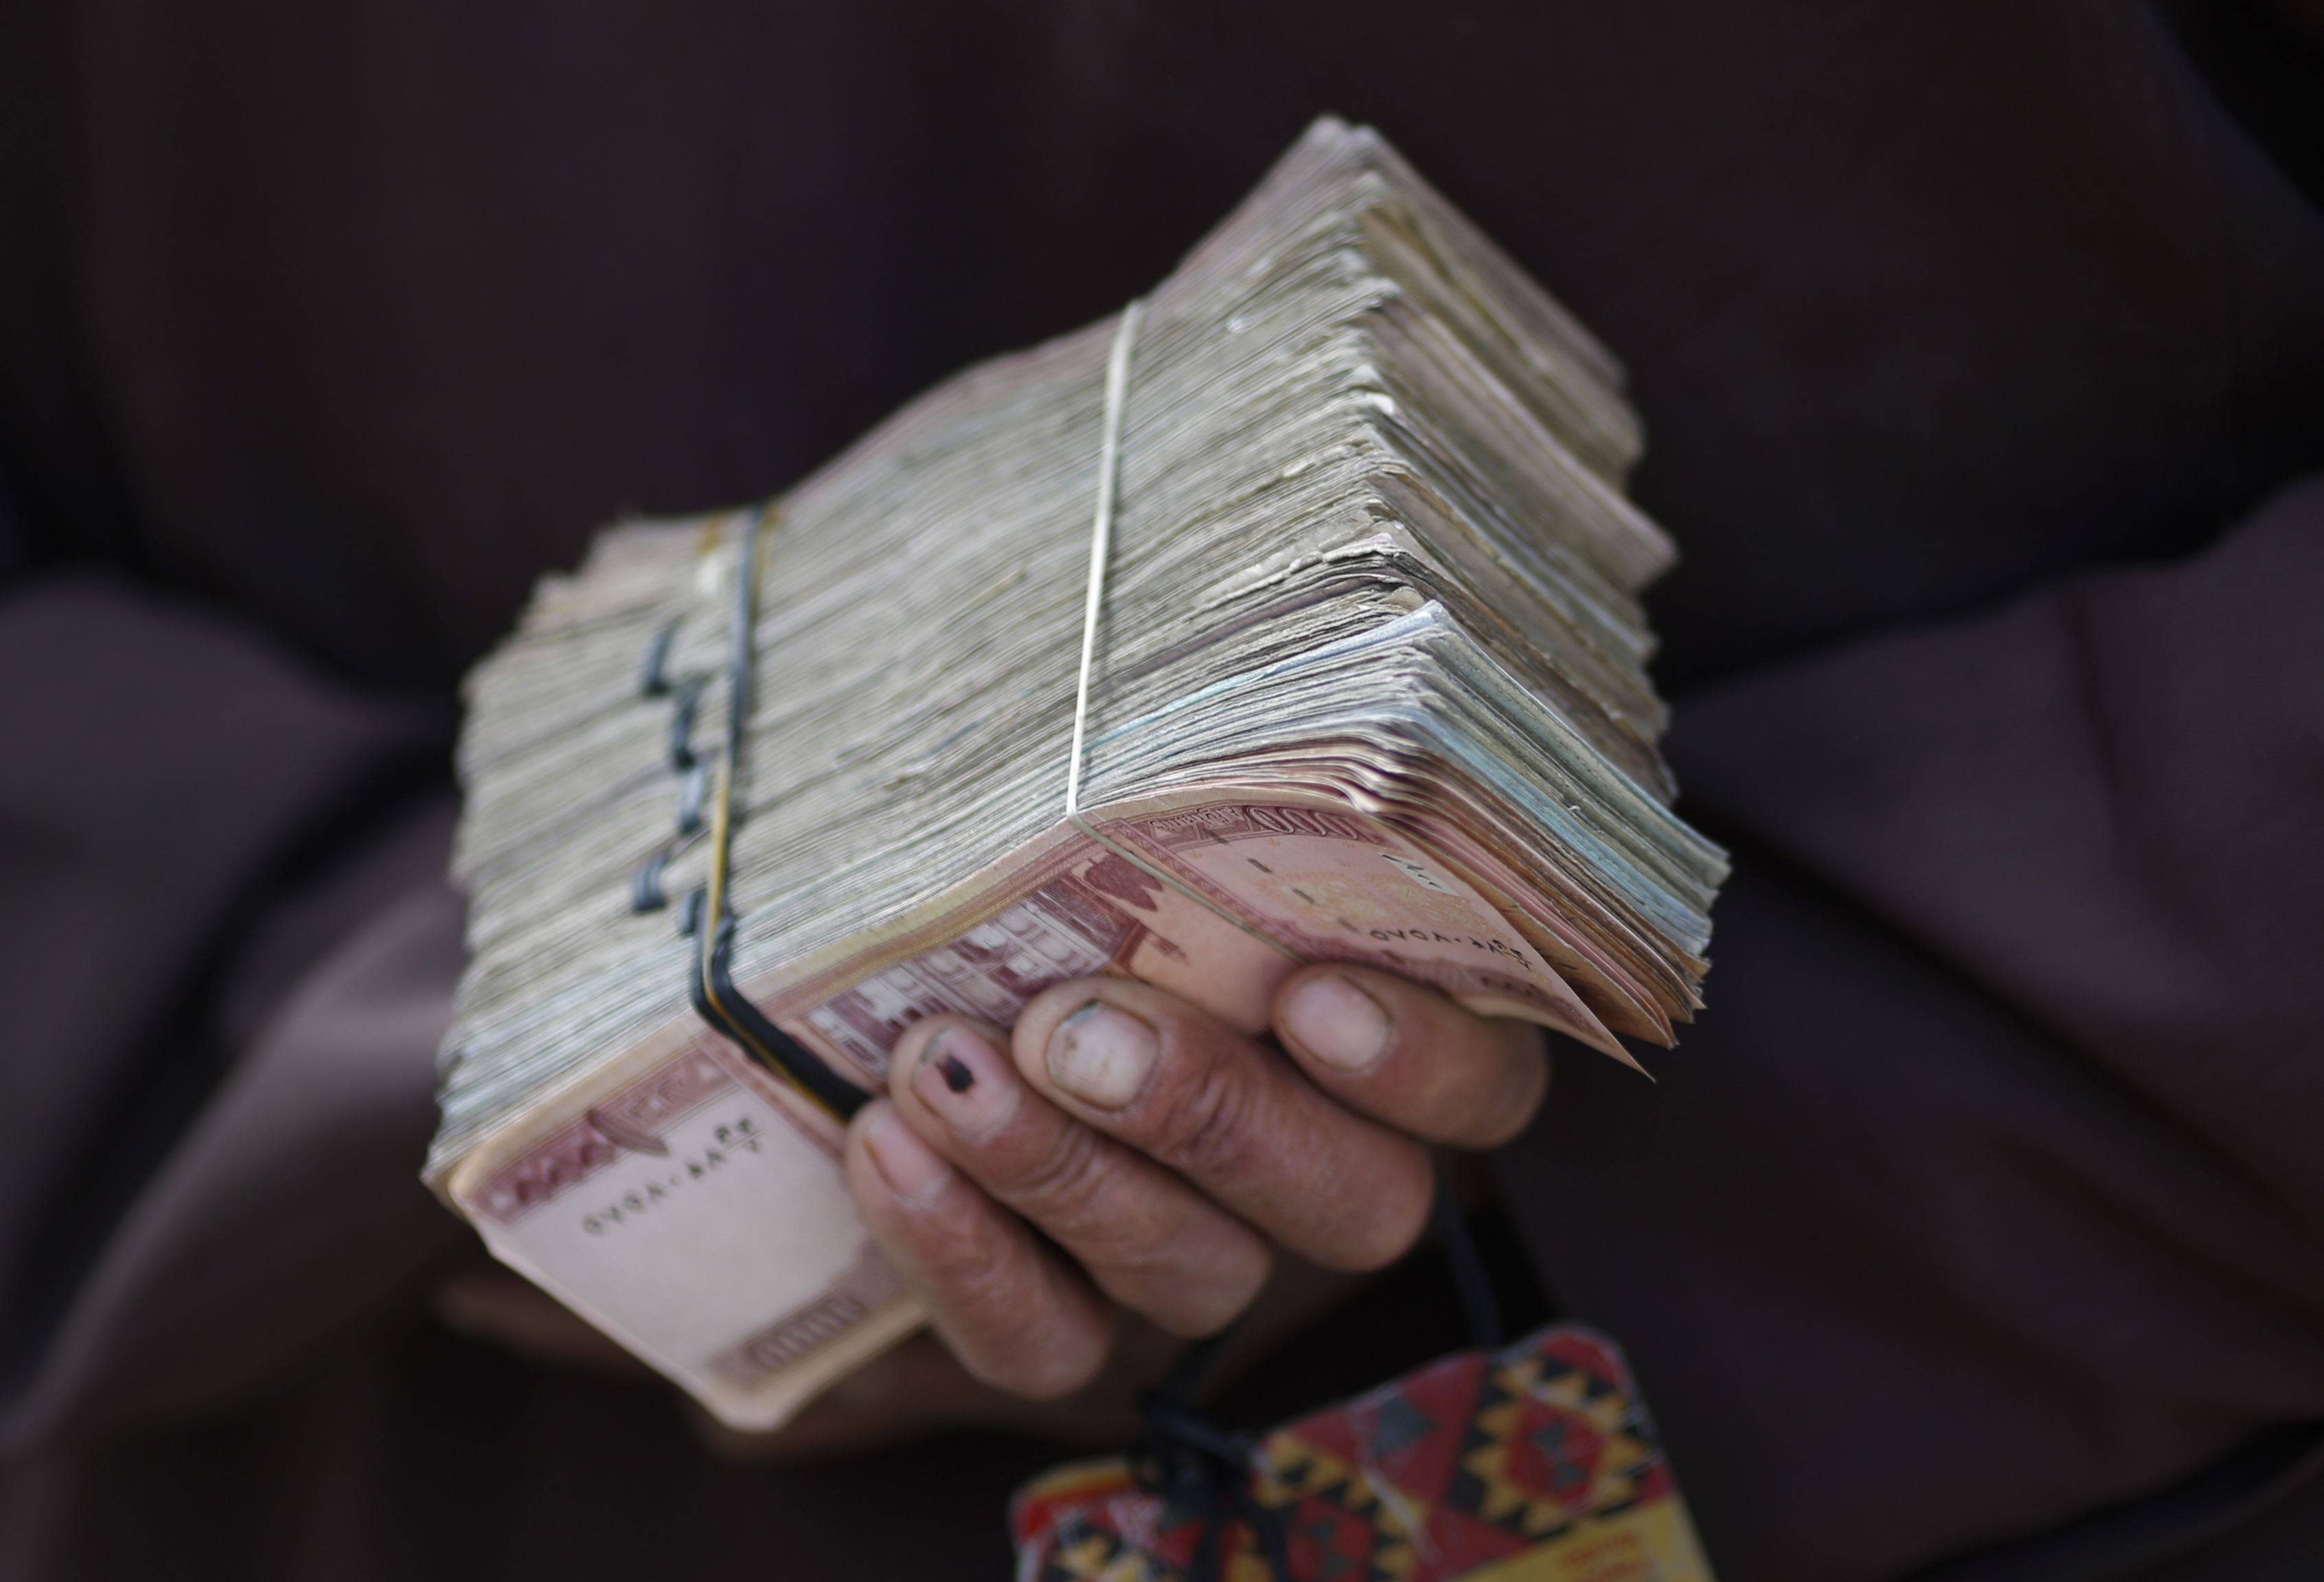 A money changer holds a stack of Afghan currency on a street in central Kabul April 2, 2014. REUTERS/Tim Wimborne/Files